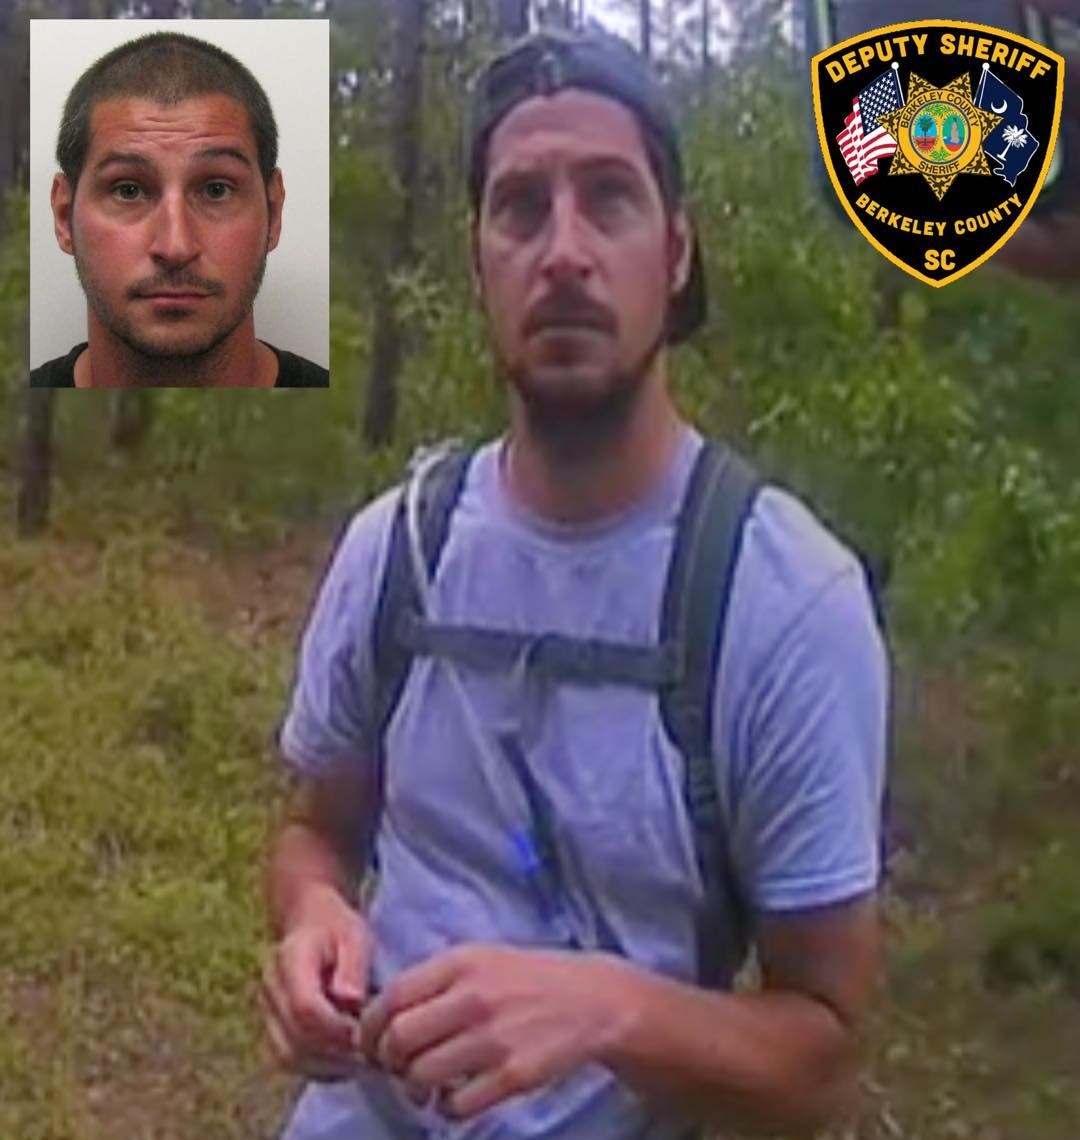 Manhunt for Michael Burham Ends with Arrest in South Carolina